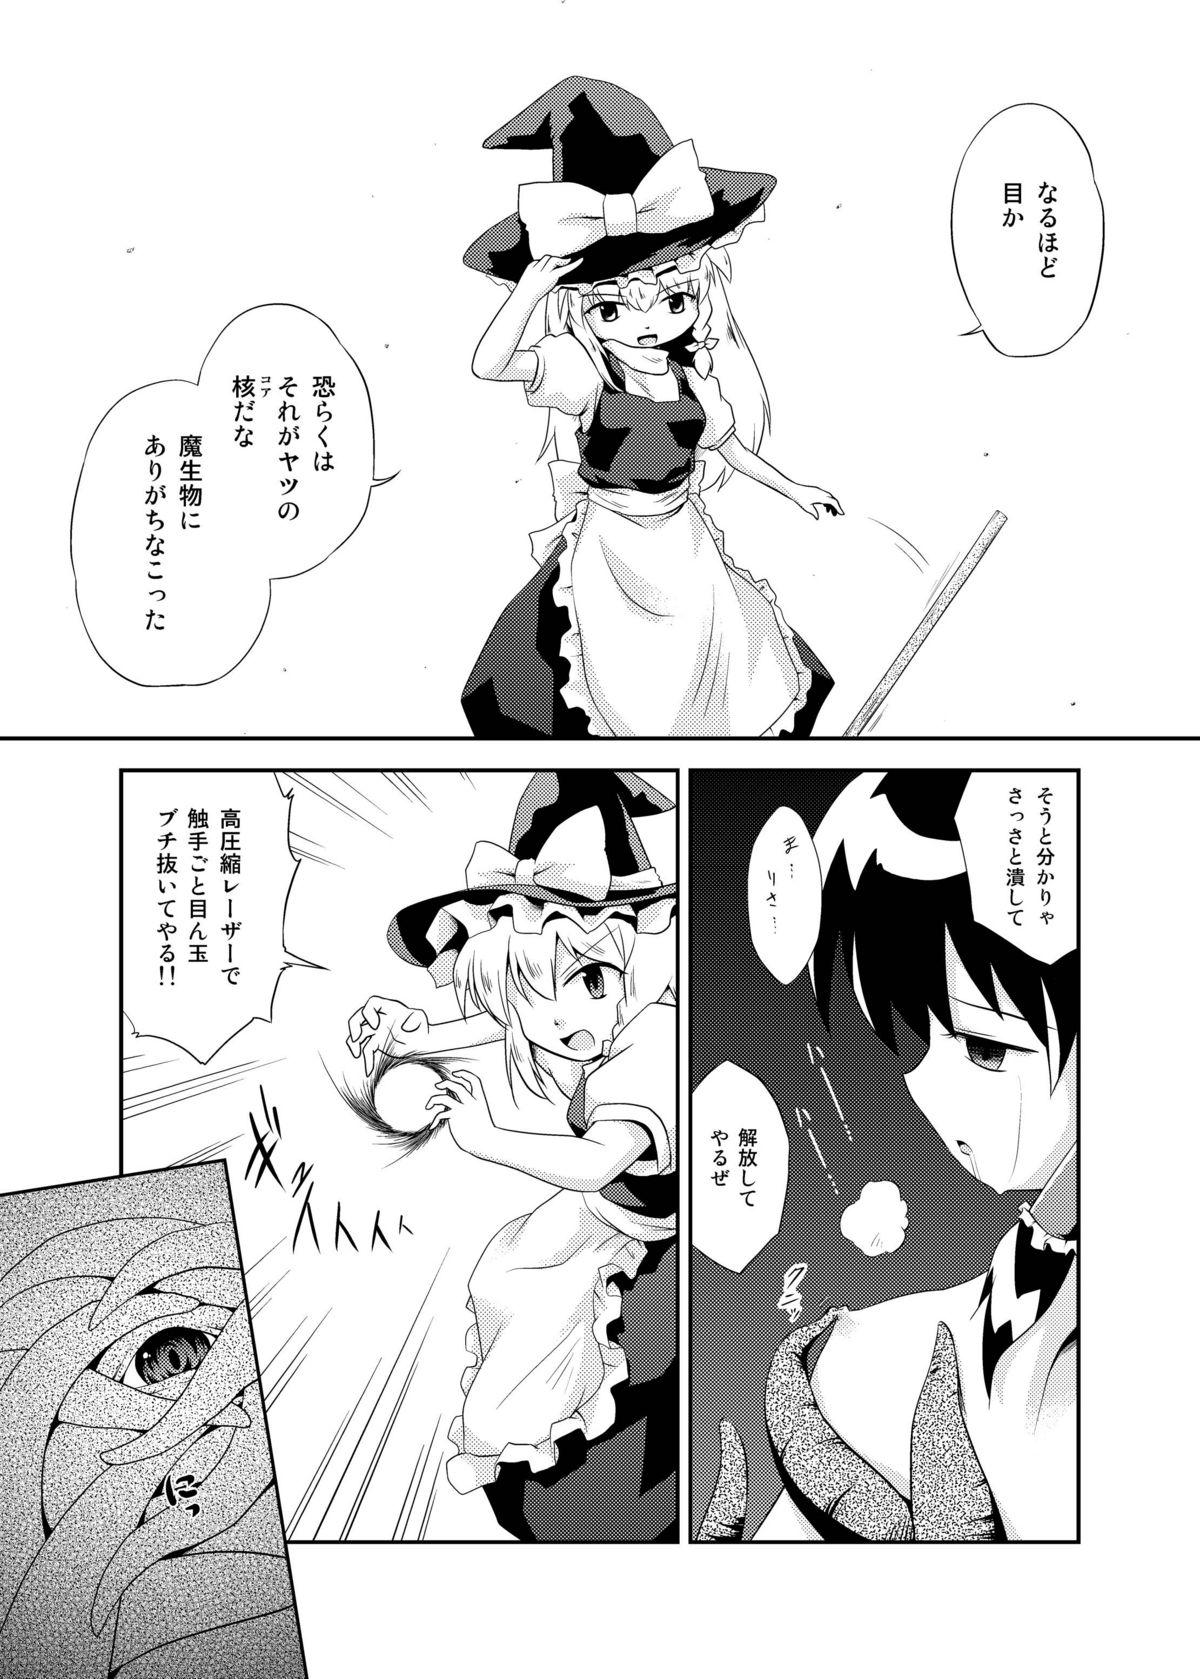 Salope DISARM CLOTHES - Touhou project Home - Page 6